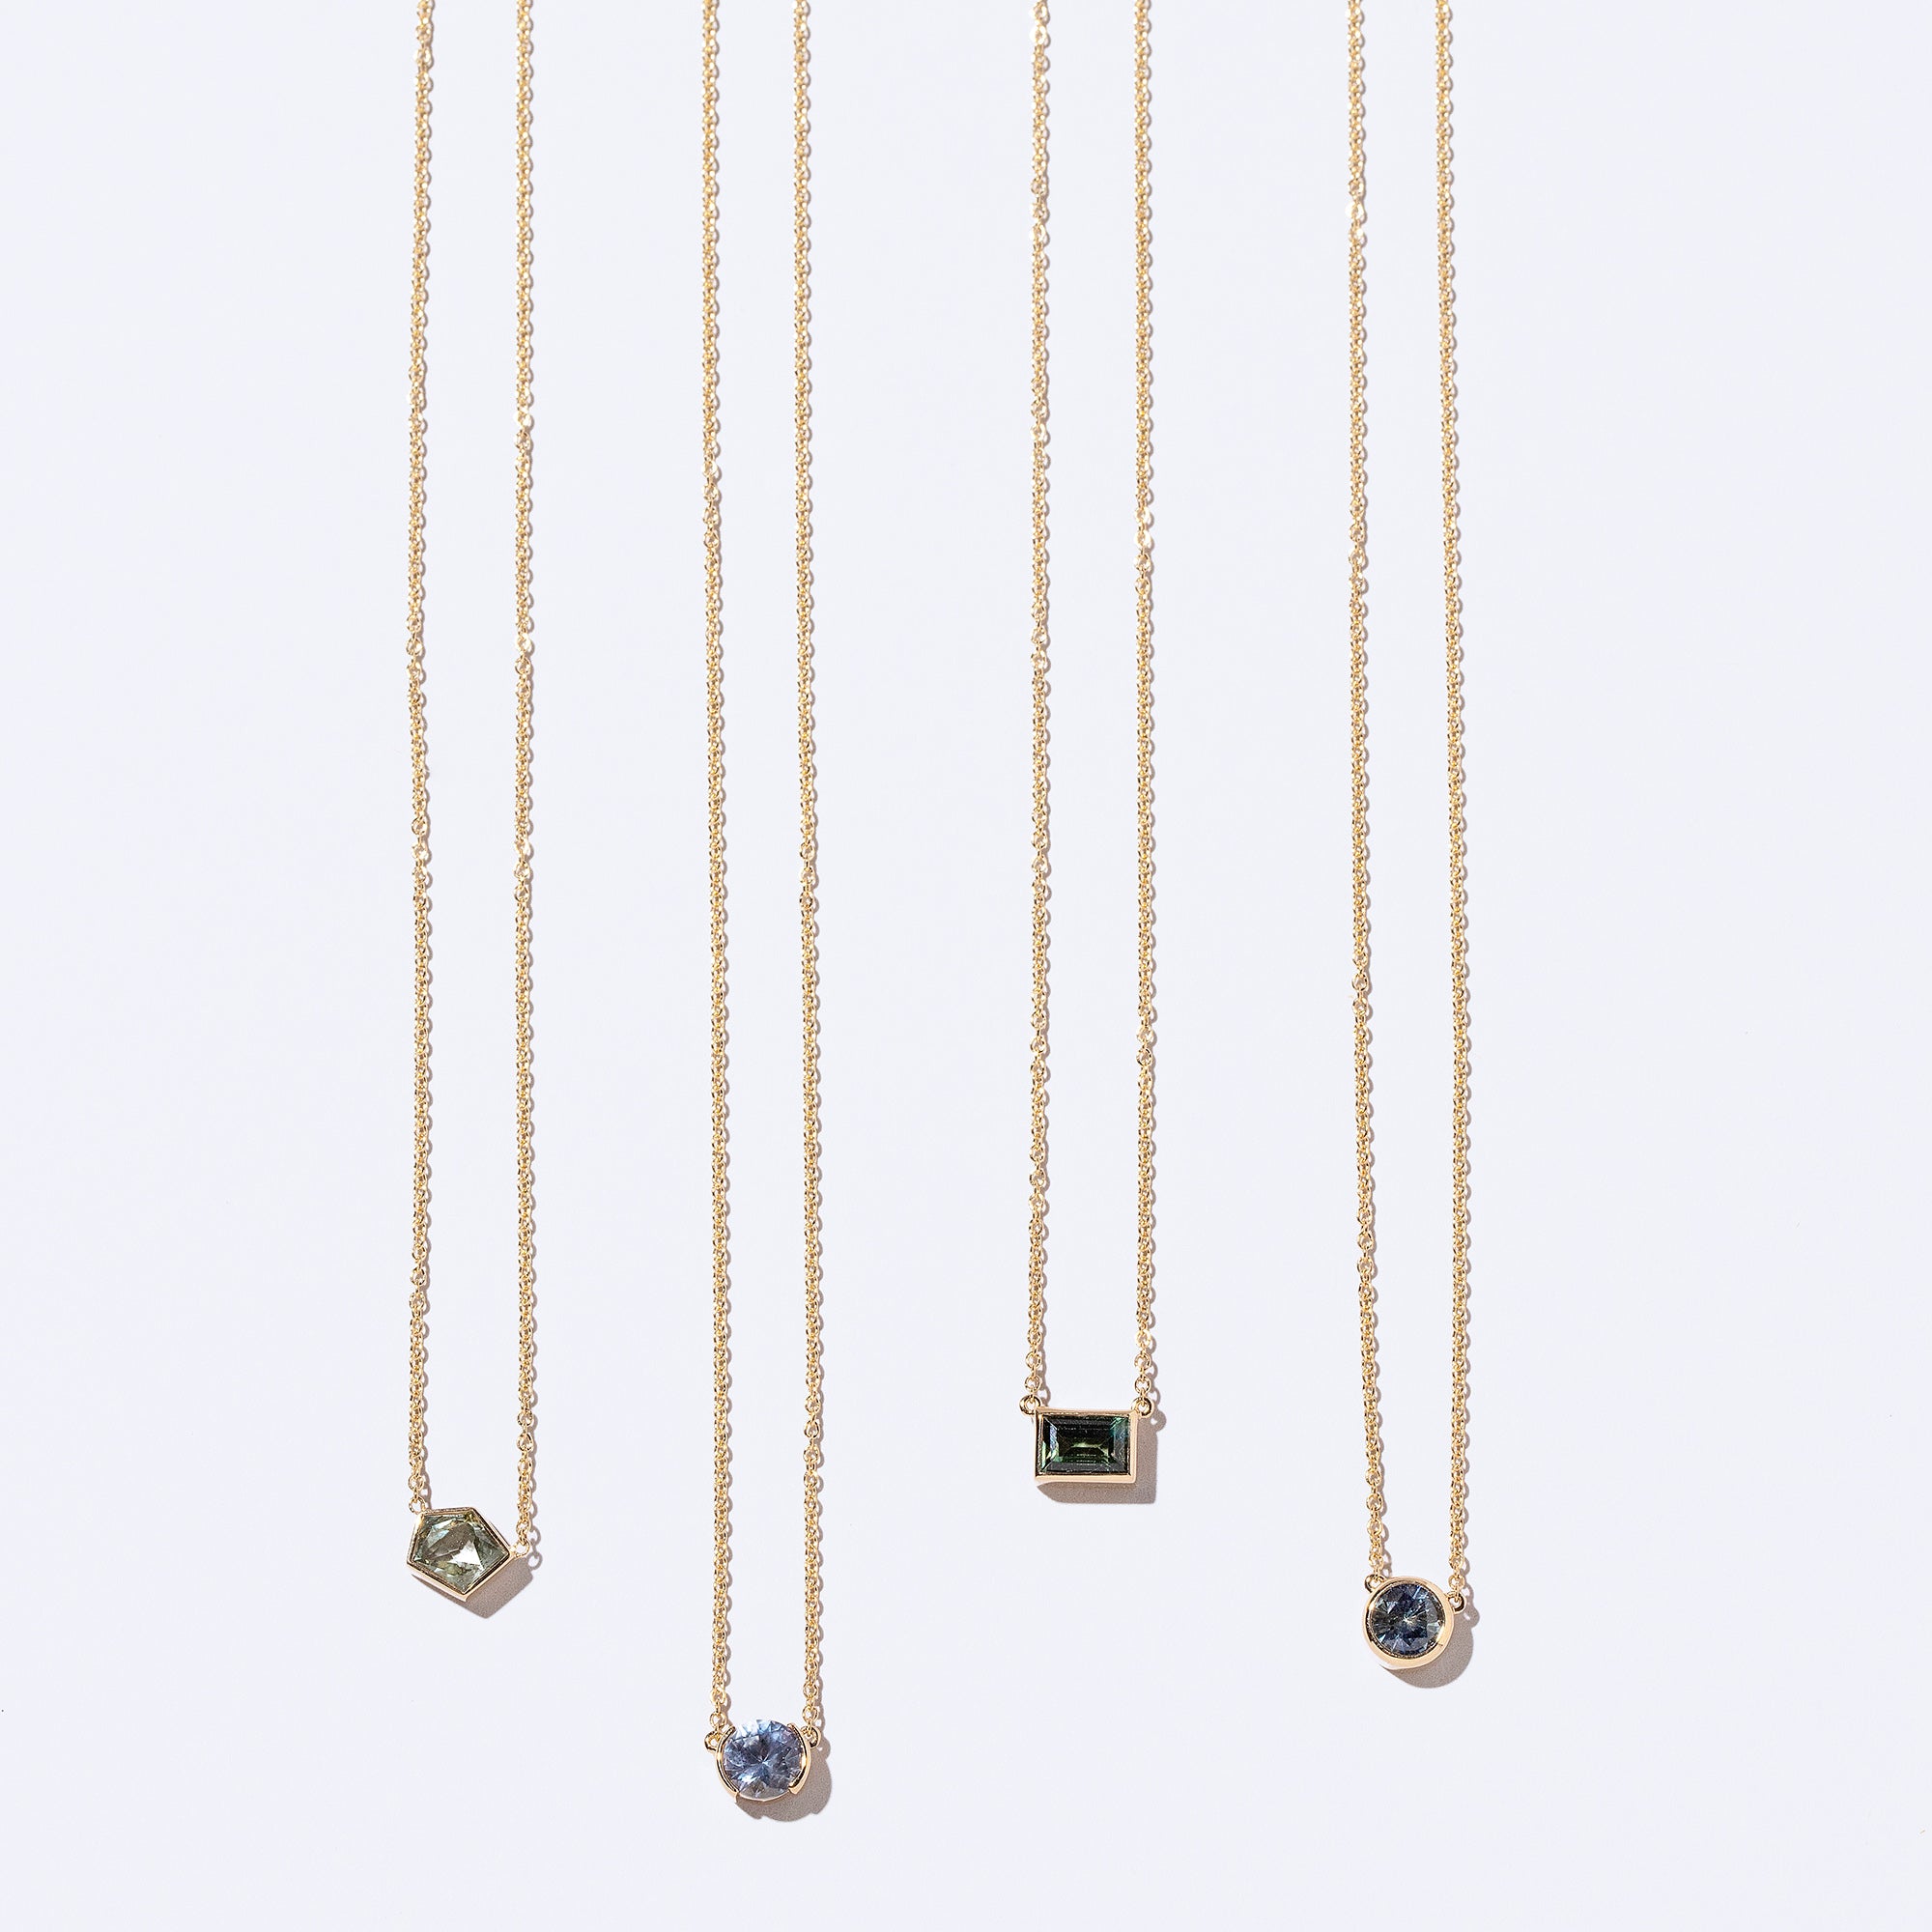 product_details::Group of Geometric Sapphire Necklaces on light colored background.